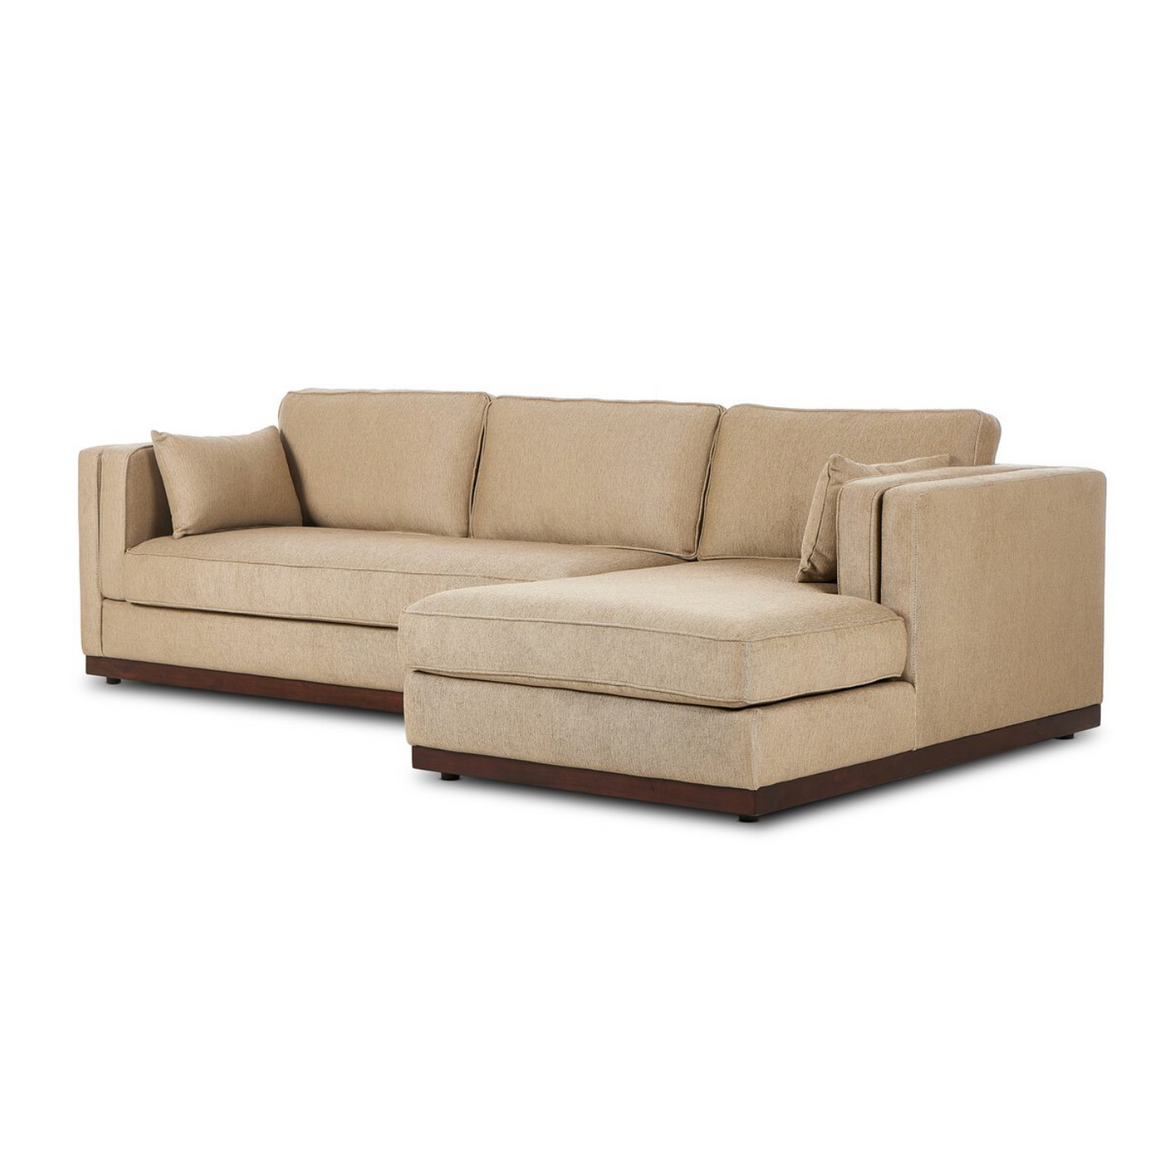 Amber 121" LAF 2 Piece Sectional W/ Chaise - Quenton Pebble